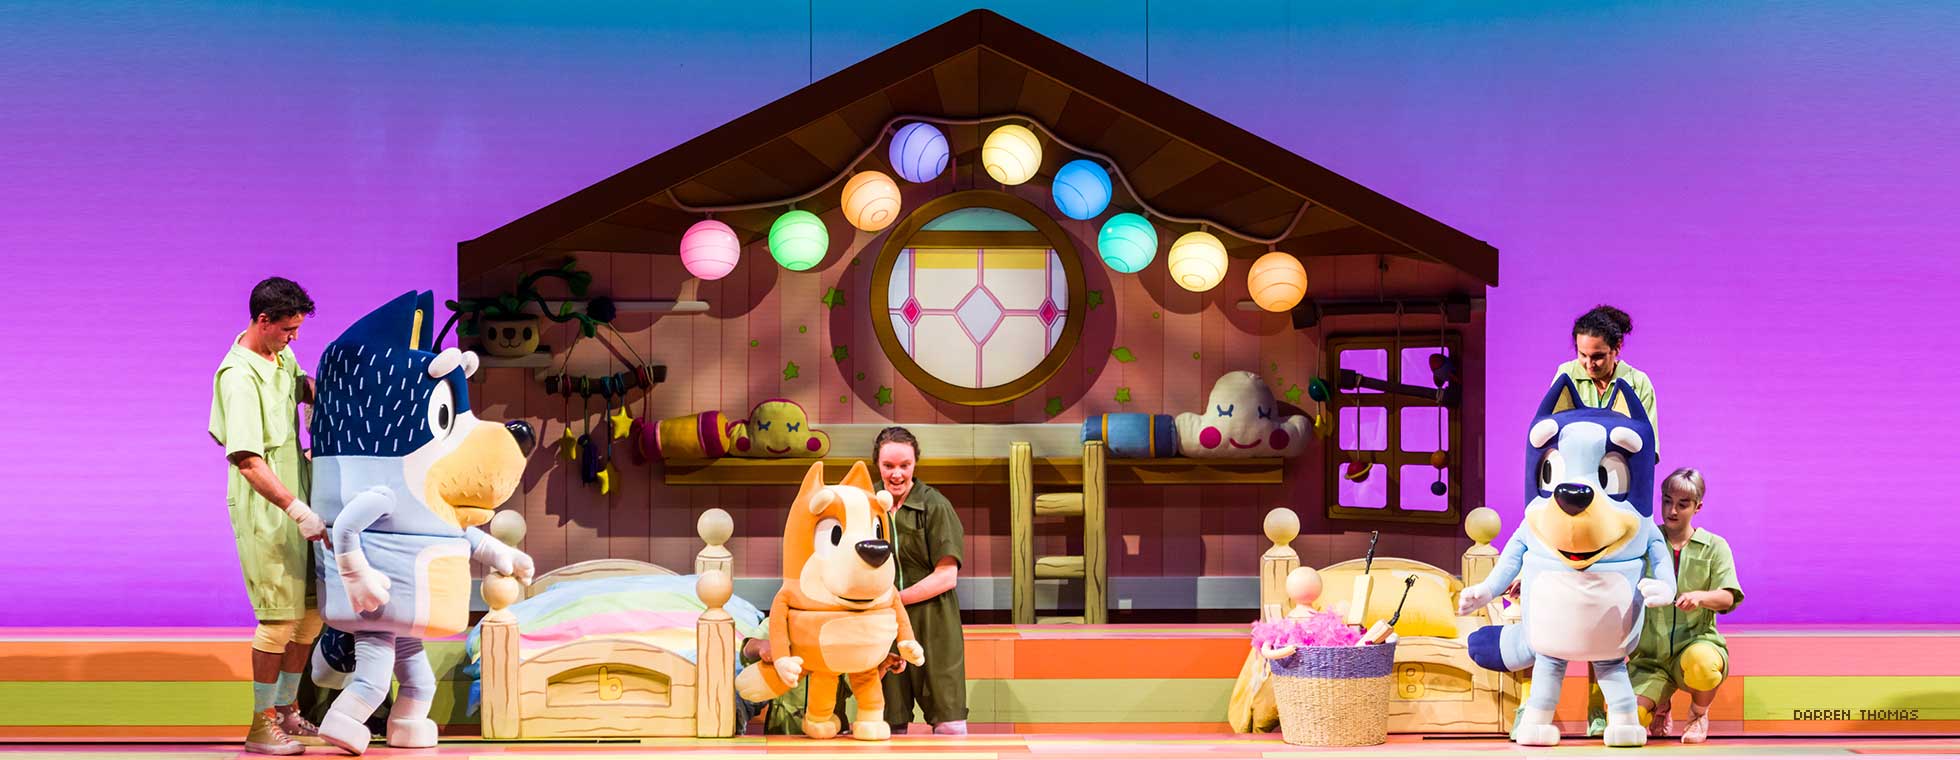 Actors stand behind three dog puppets to control their movements in scene depicting bedtime with a stage set with twin beds and children’s toys. 